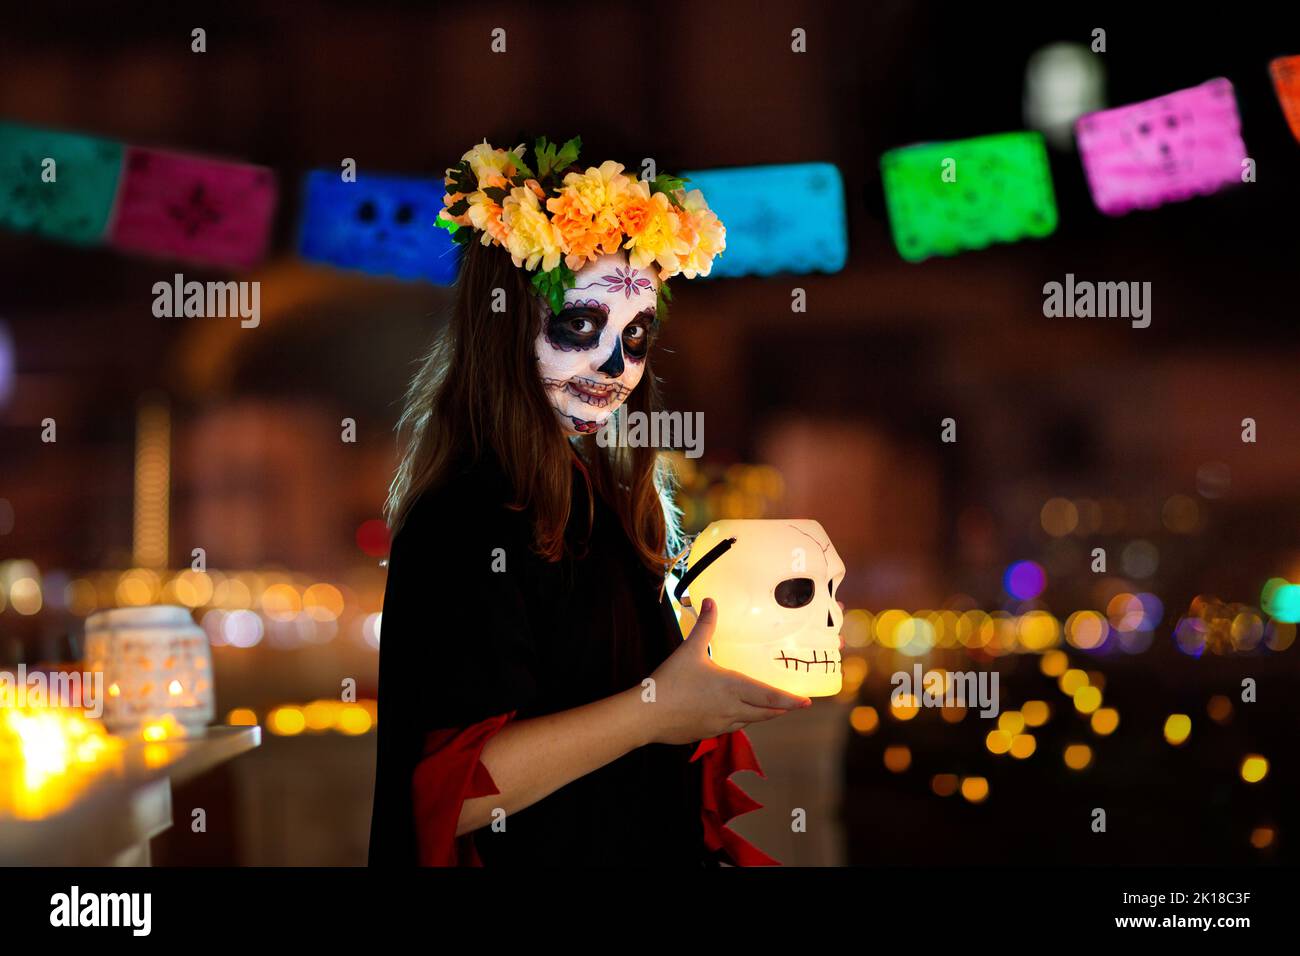 Dia de los muertos celebration. Traditional Day of the Dead party. Halloween in Mexico. Mexican girl in traditional make up and Catrina costume with a Stock Photo